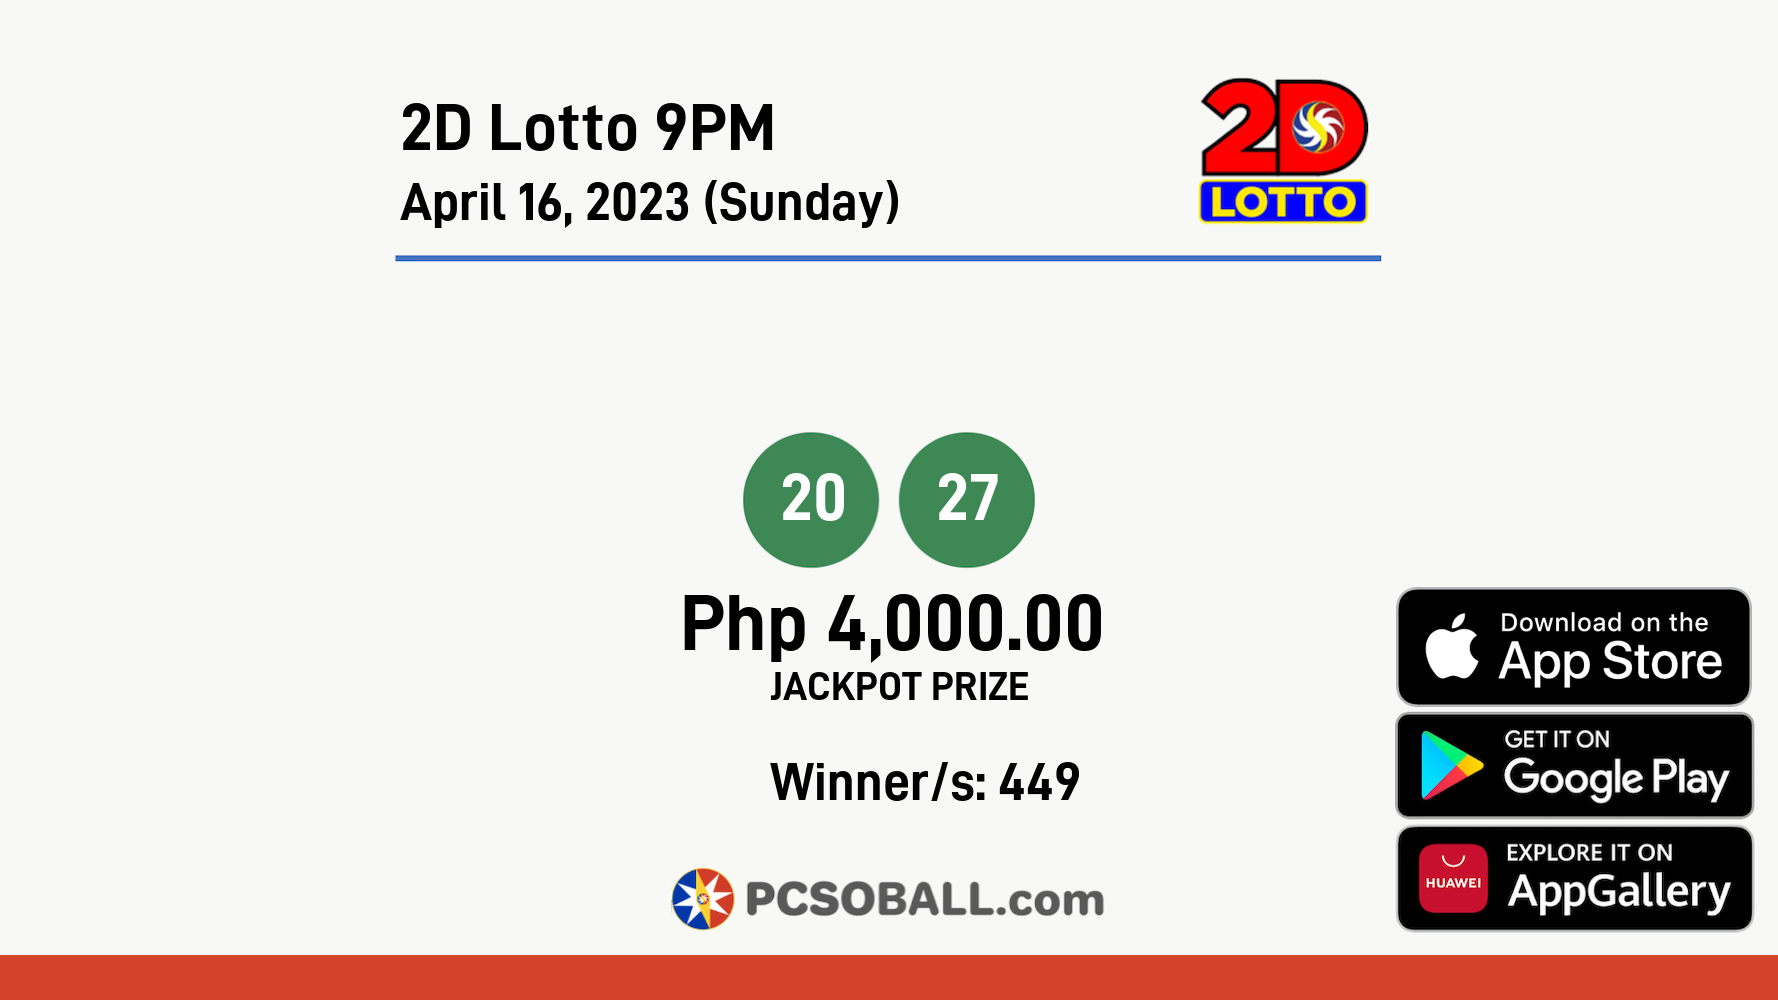 2D Lotto 9PM April 16, 2023 (Sunday) Result